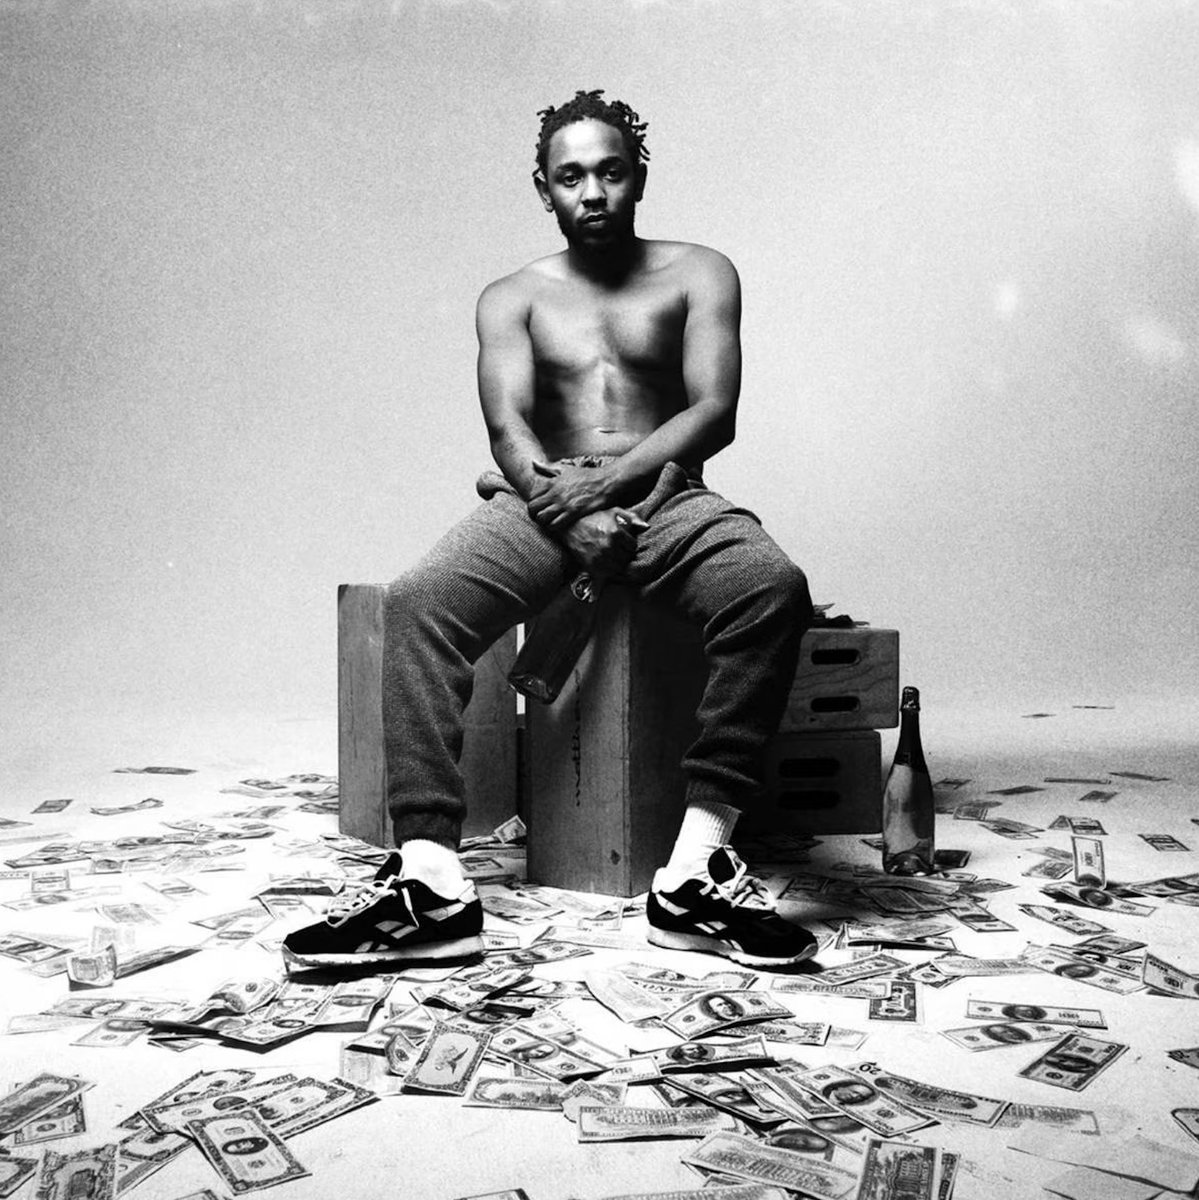 Today in 2015, @kendricklamar's 'To Pimp a Butterfly' debuted at #1 on the Billboard 200. It became the most critically acclaimed record of the 2010s decade.